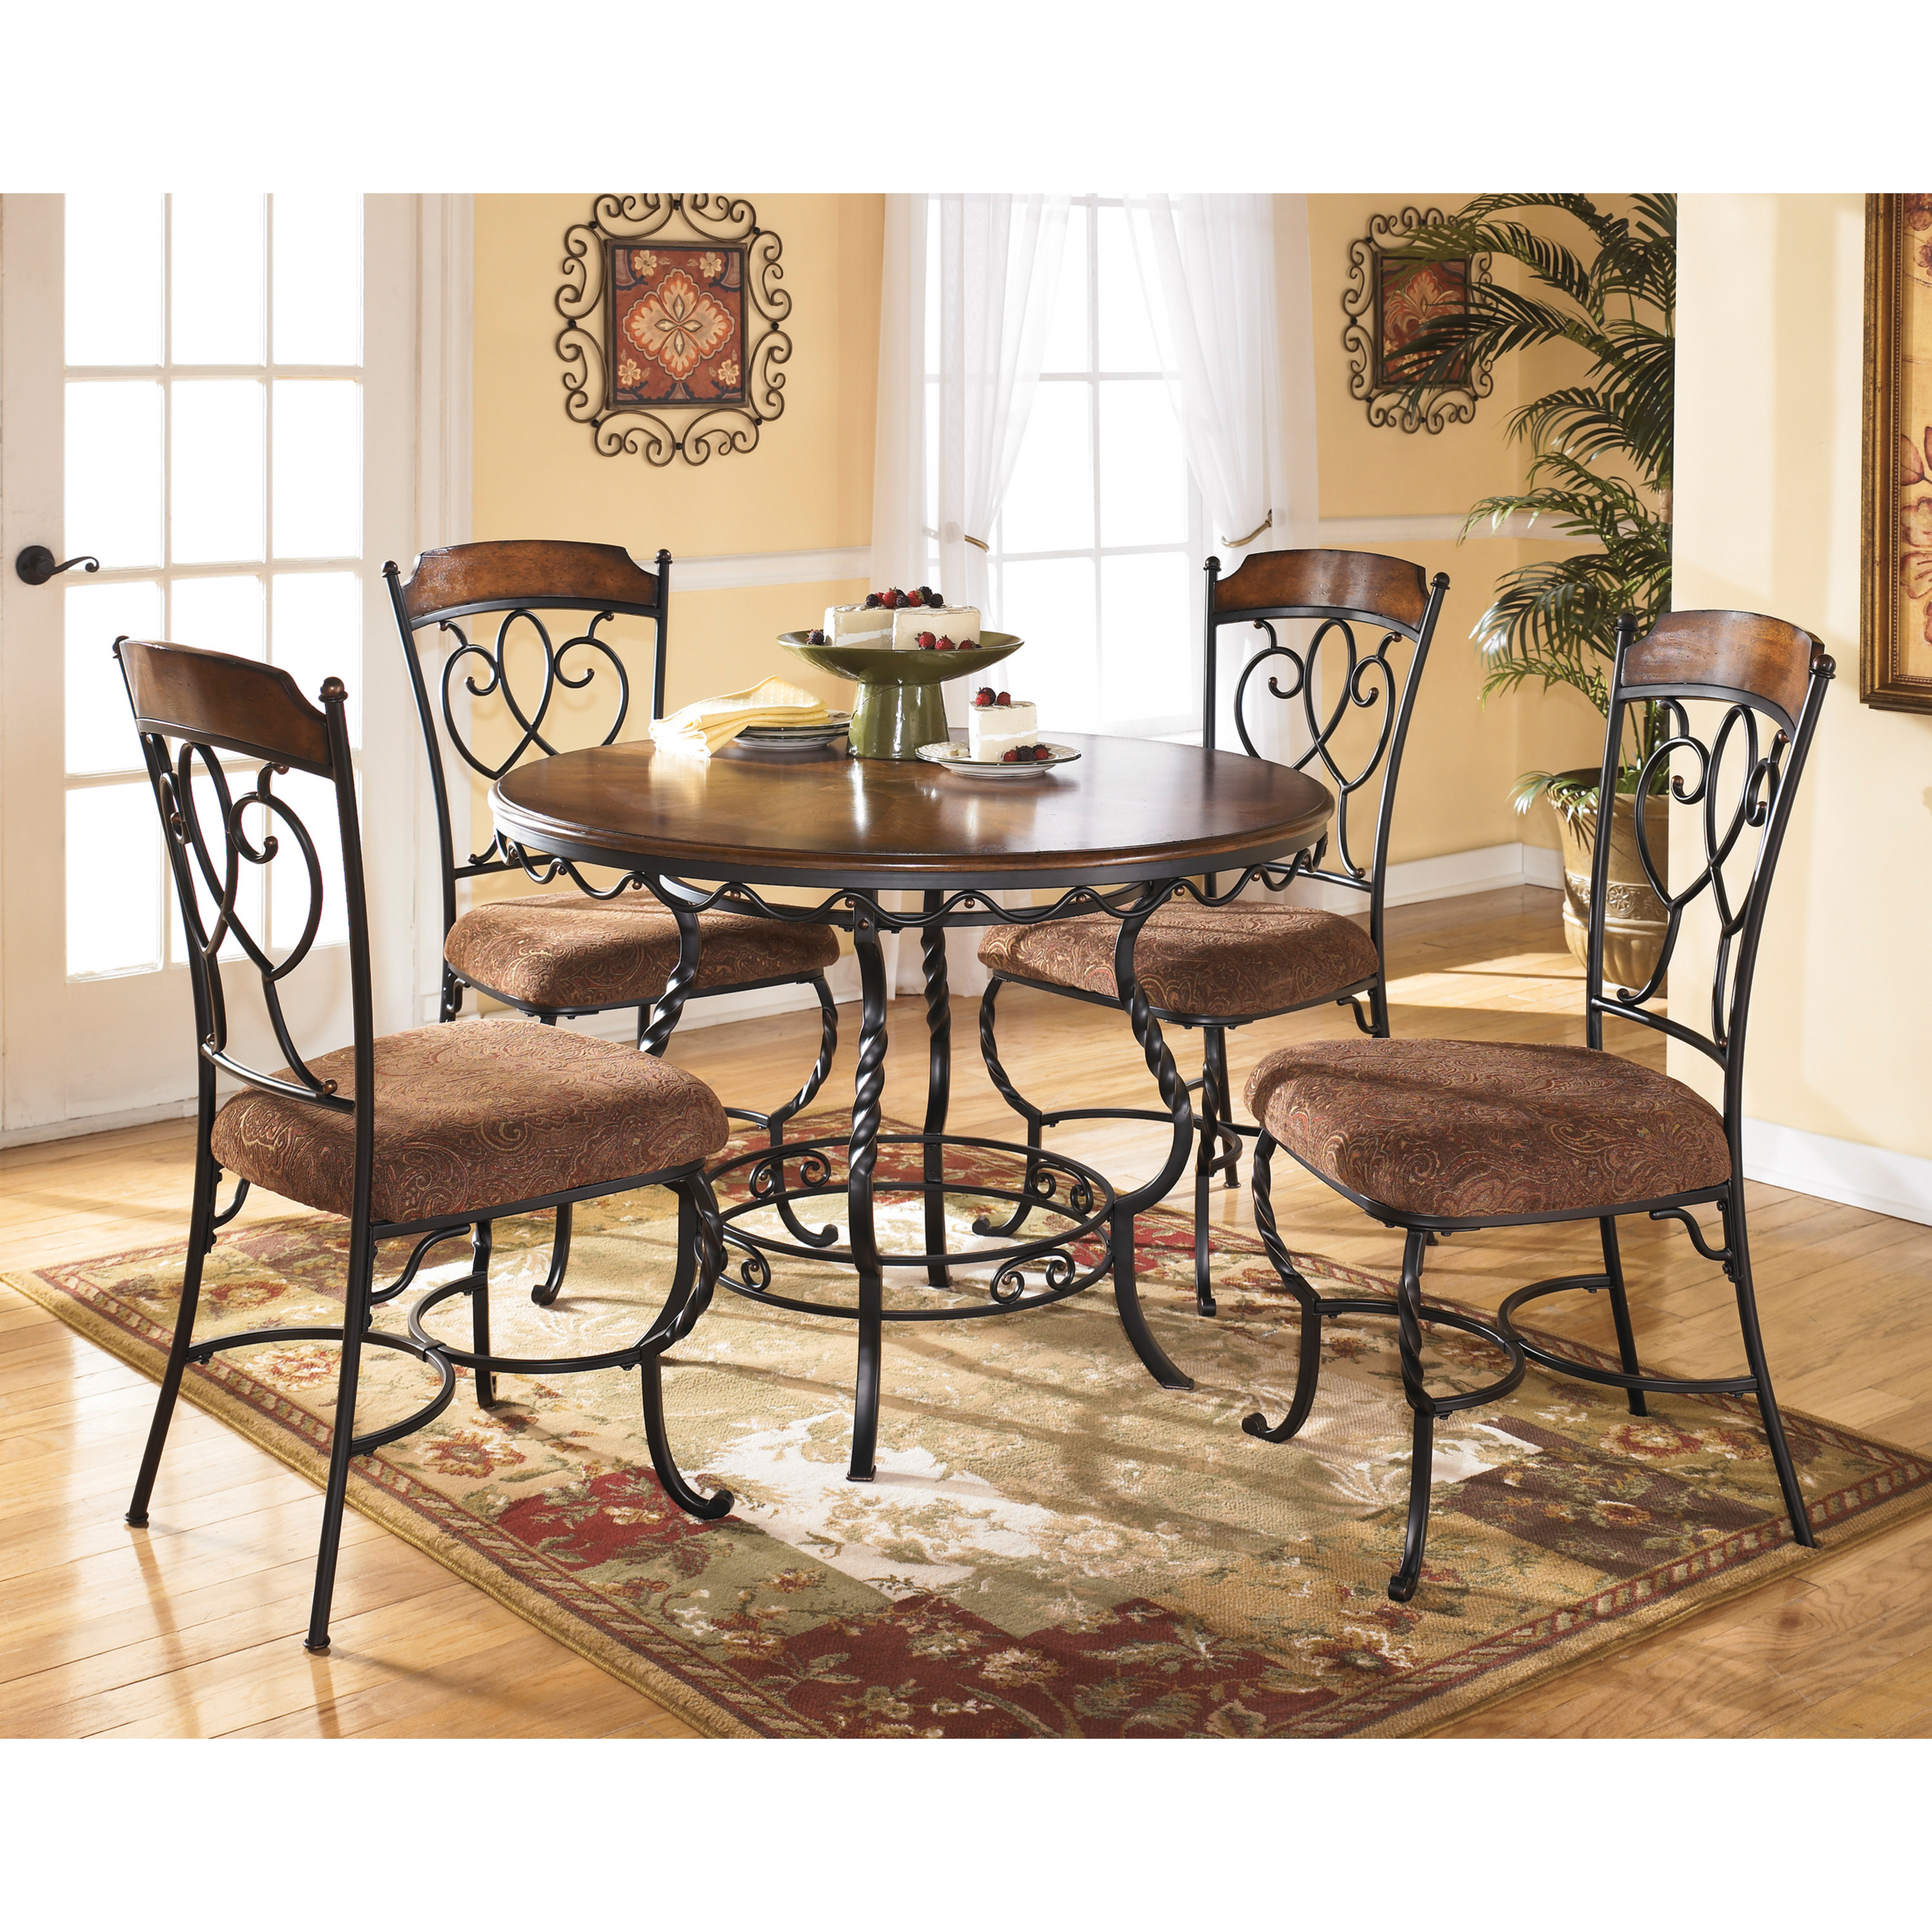 Pier one dining sets